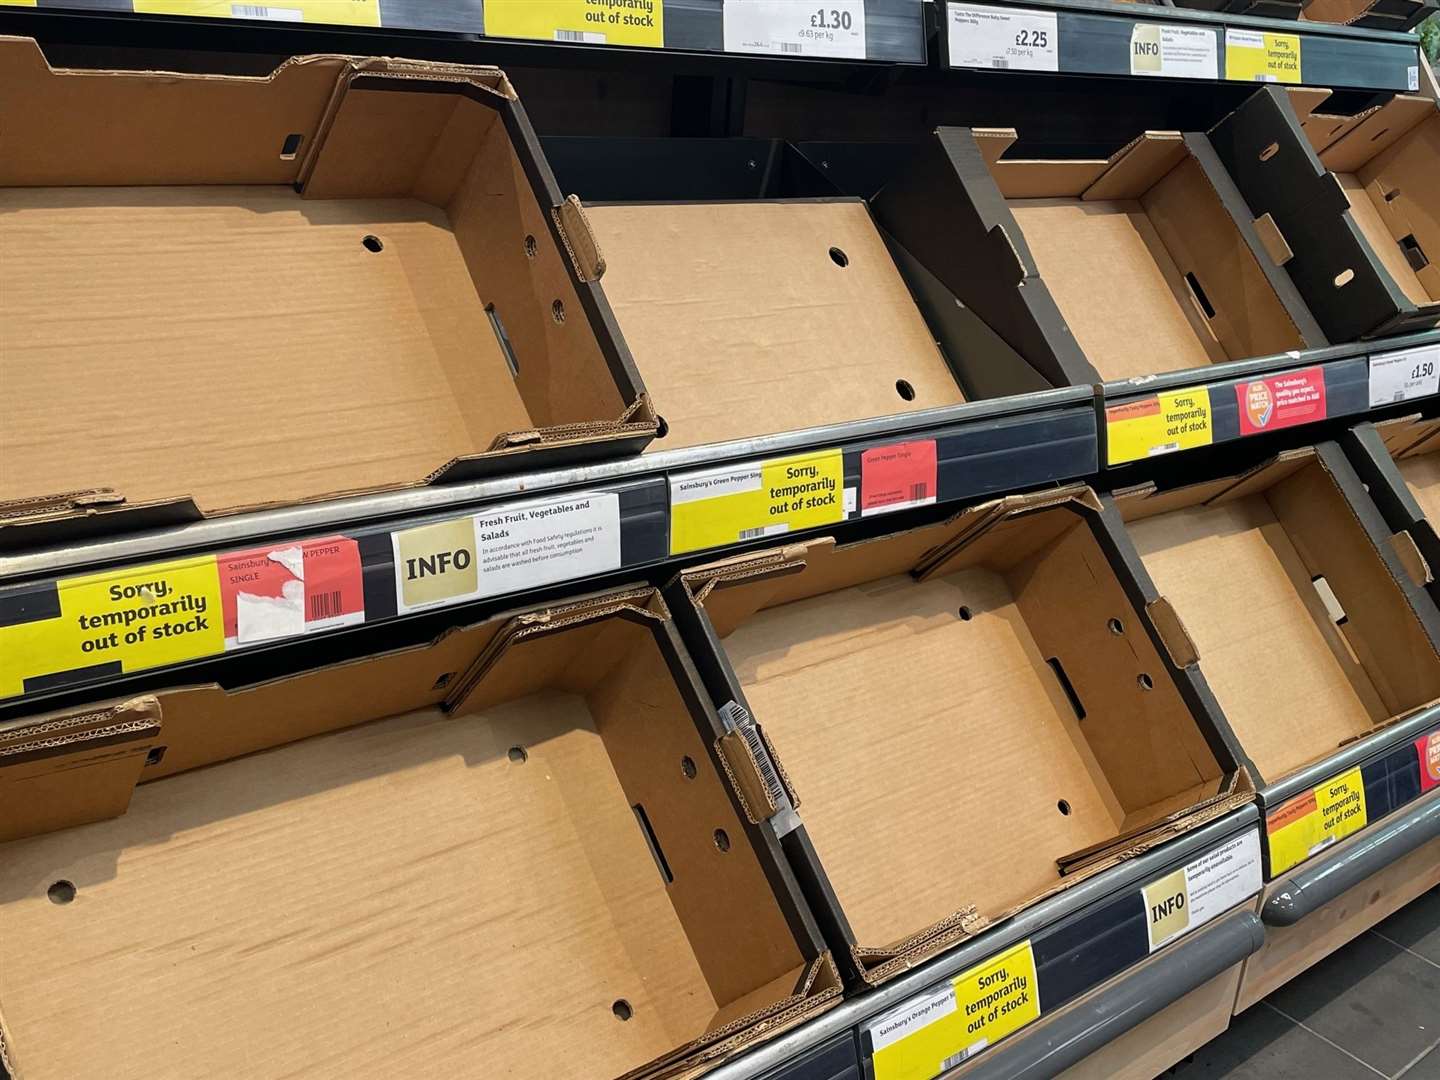 Shelves and online stocks are empty in major supermarkets